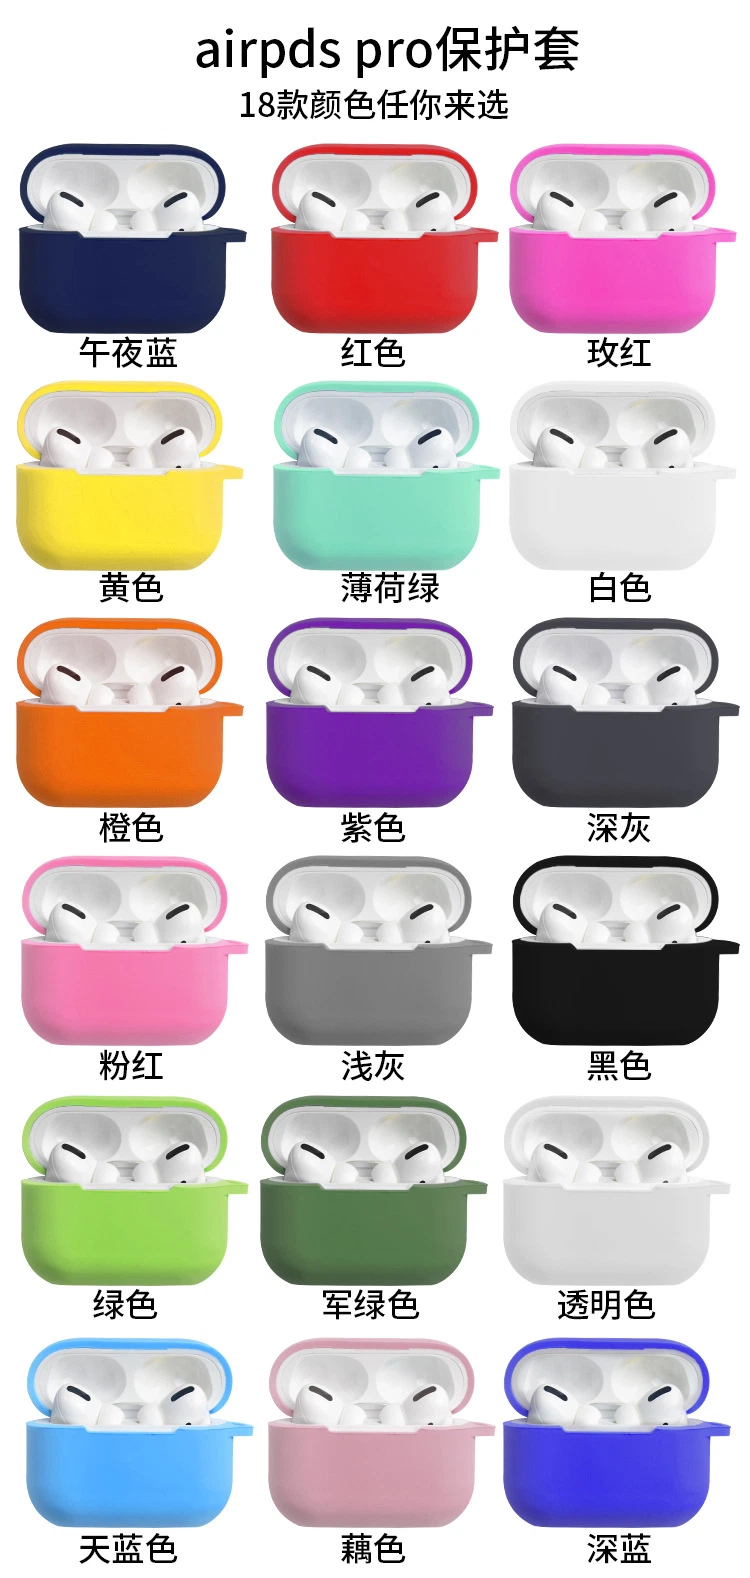 Fashion Air Pod Cover Case for Airpod 2 3 PRO Compatible Case Cover Skin Sleeve Silicon, High Quality Air Pod Cover